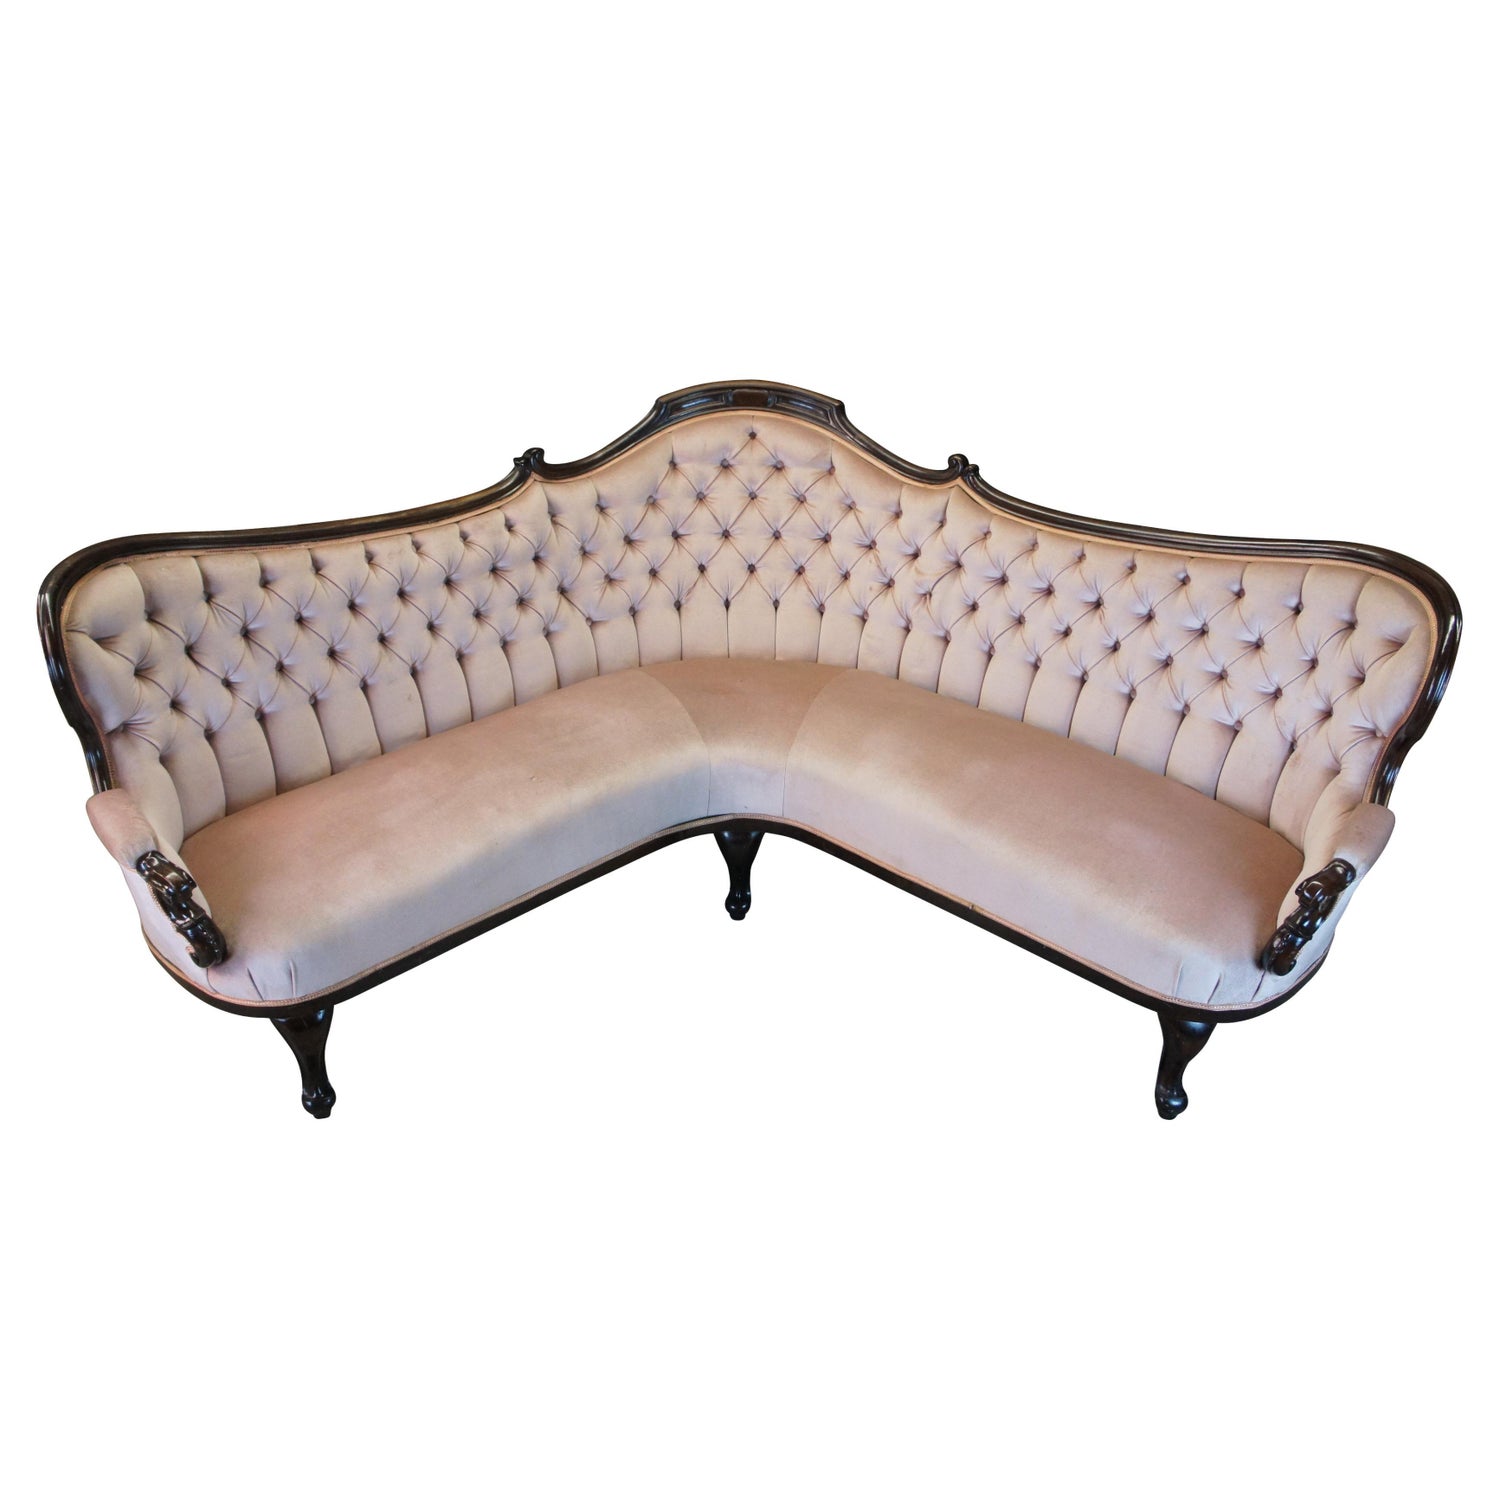 Queen Anne Sofas 8 For At